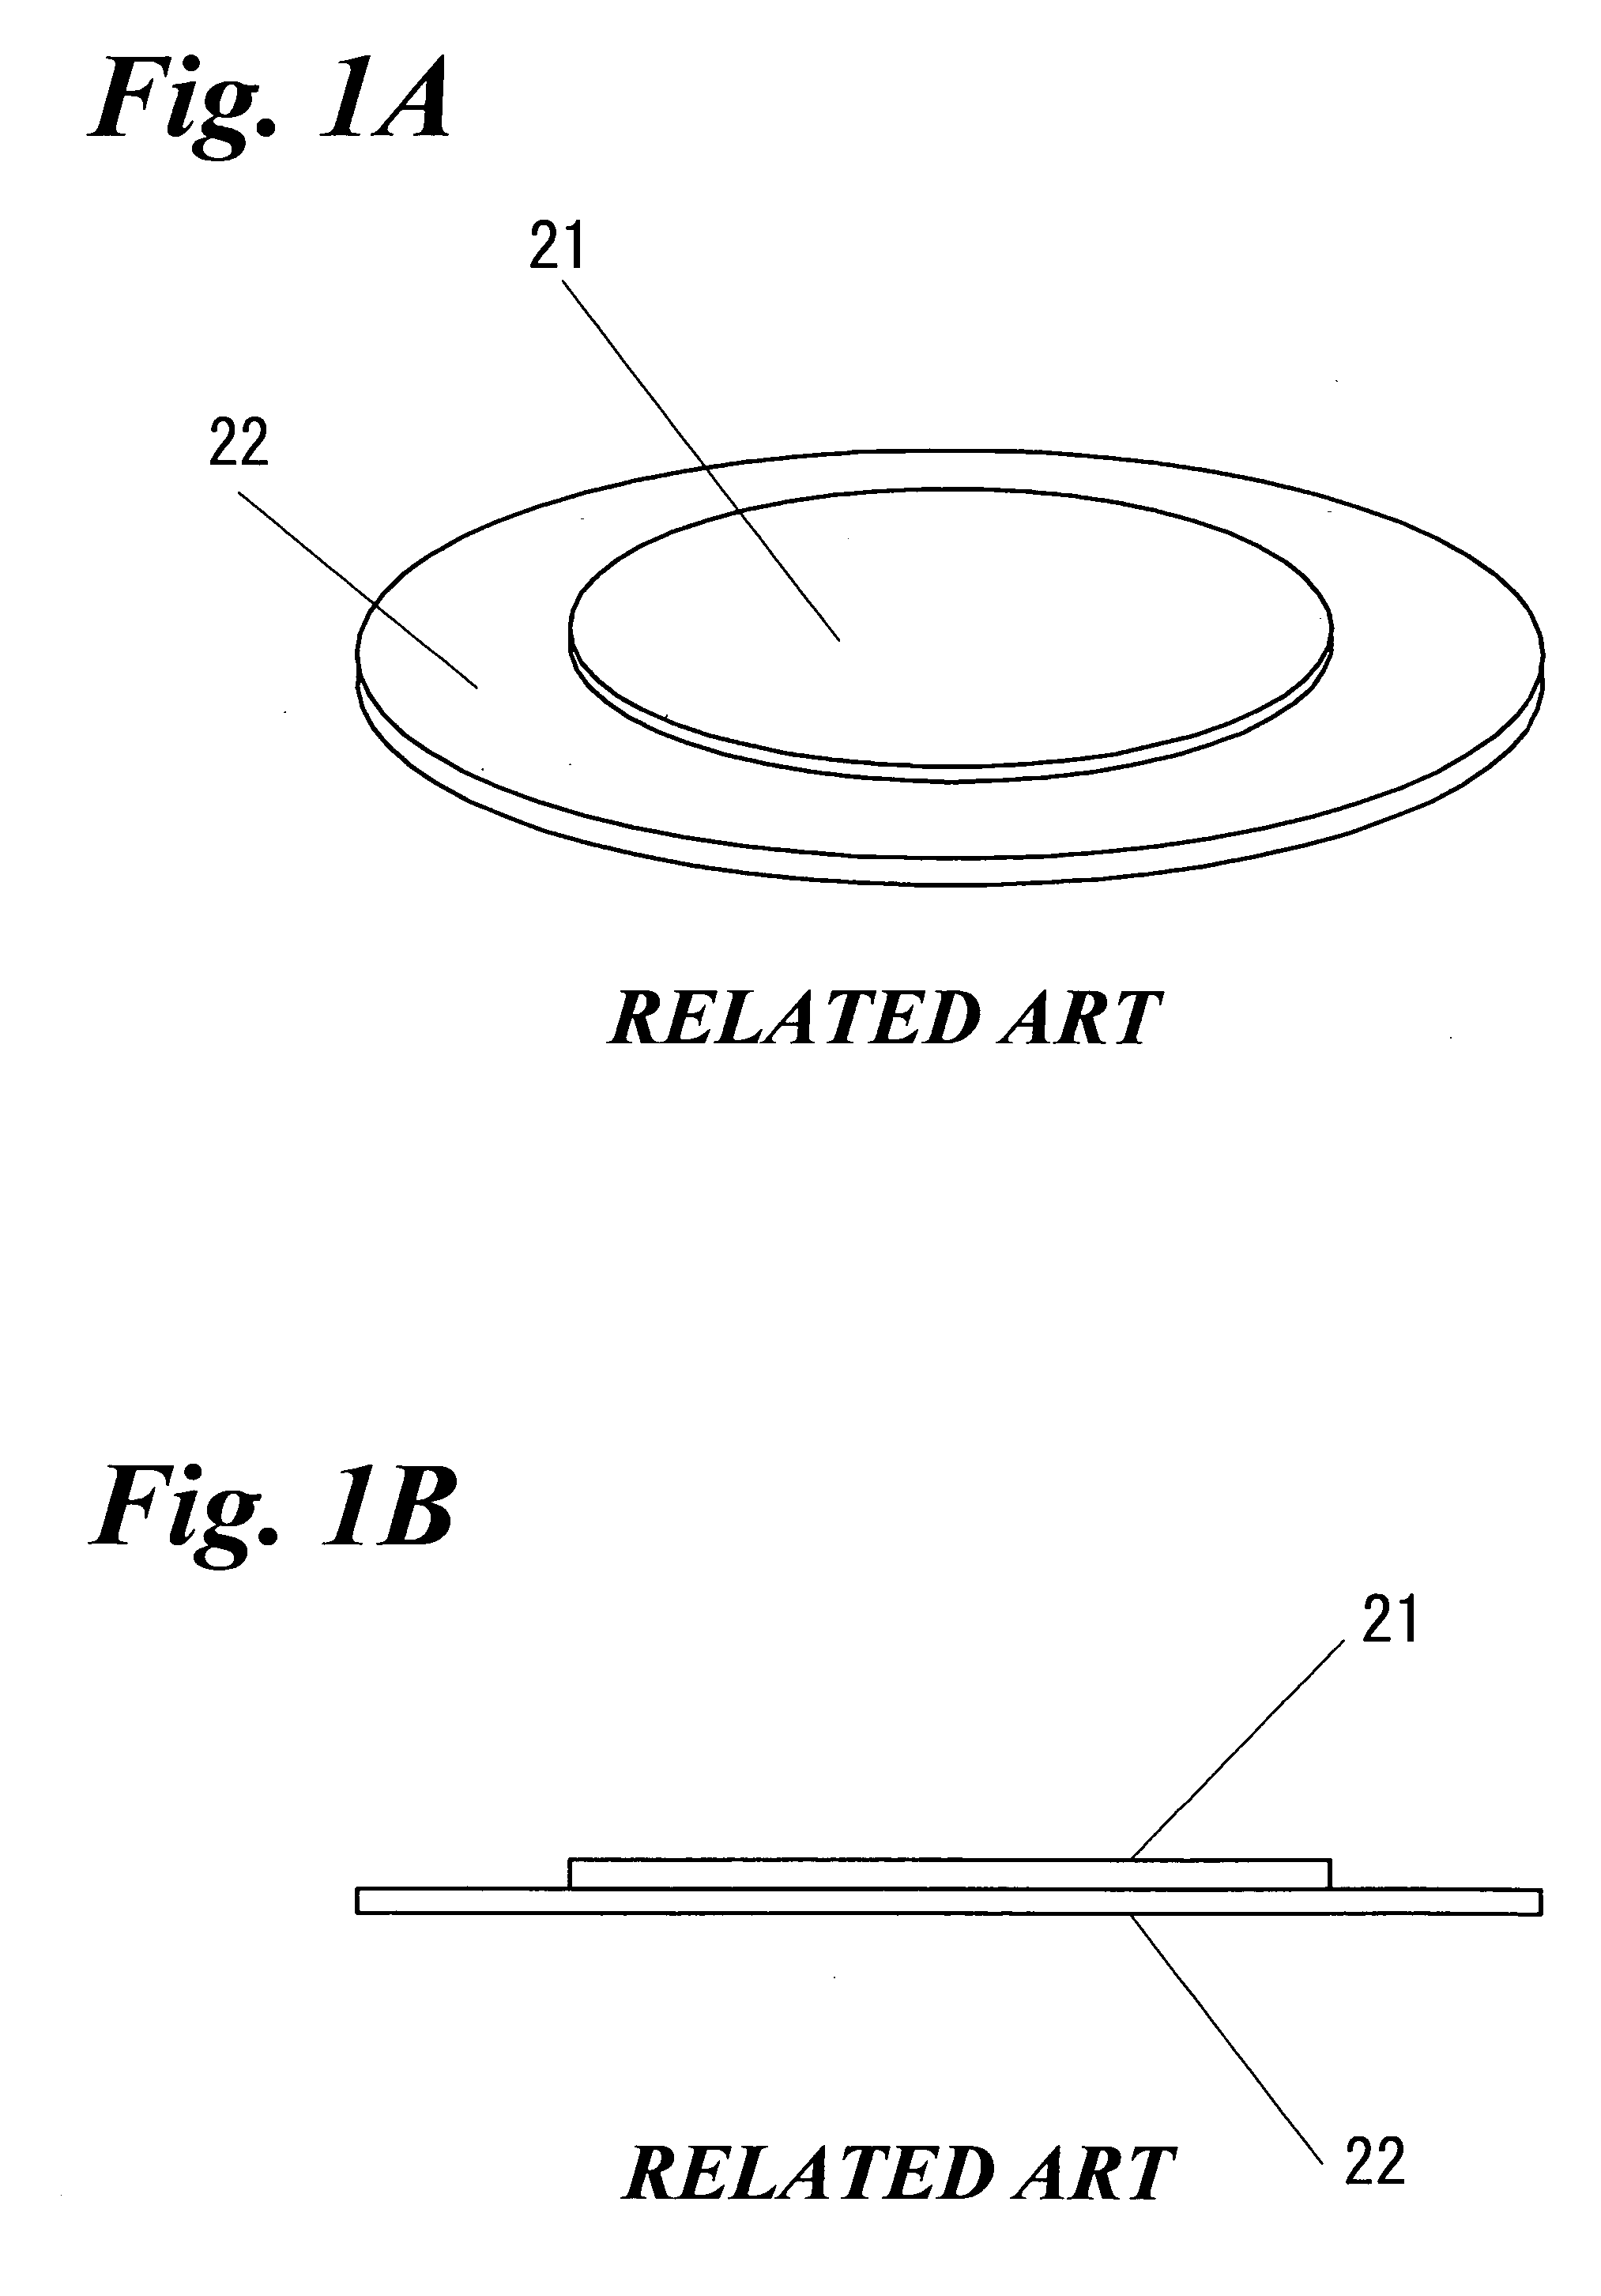 Piezoelectric device for generating acoustic signal